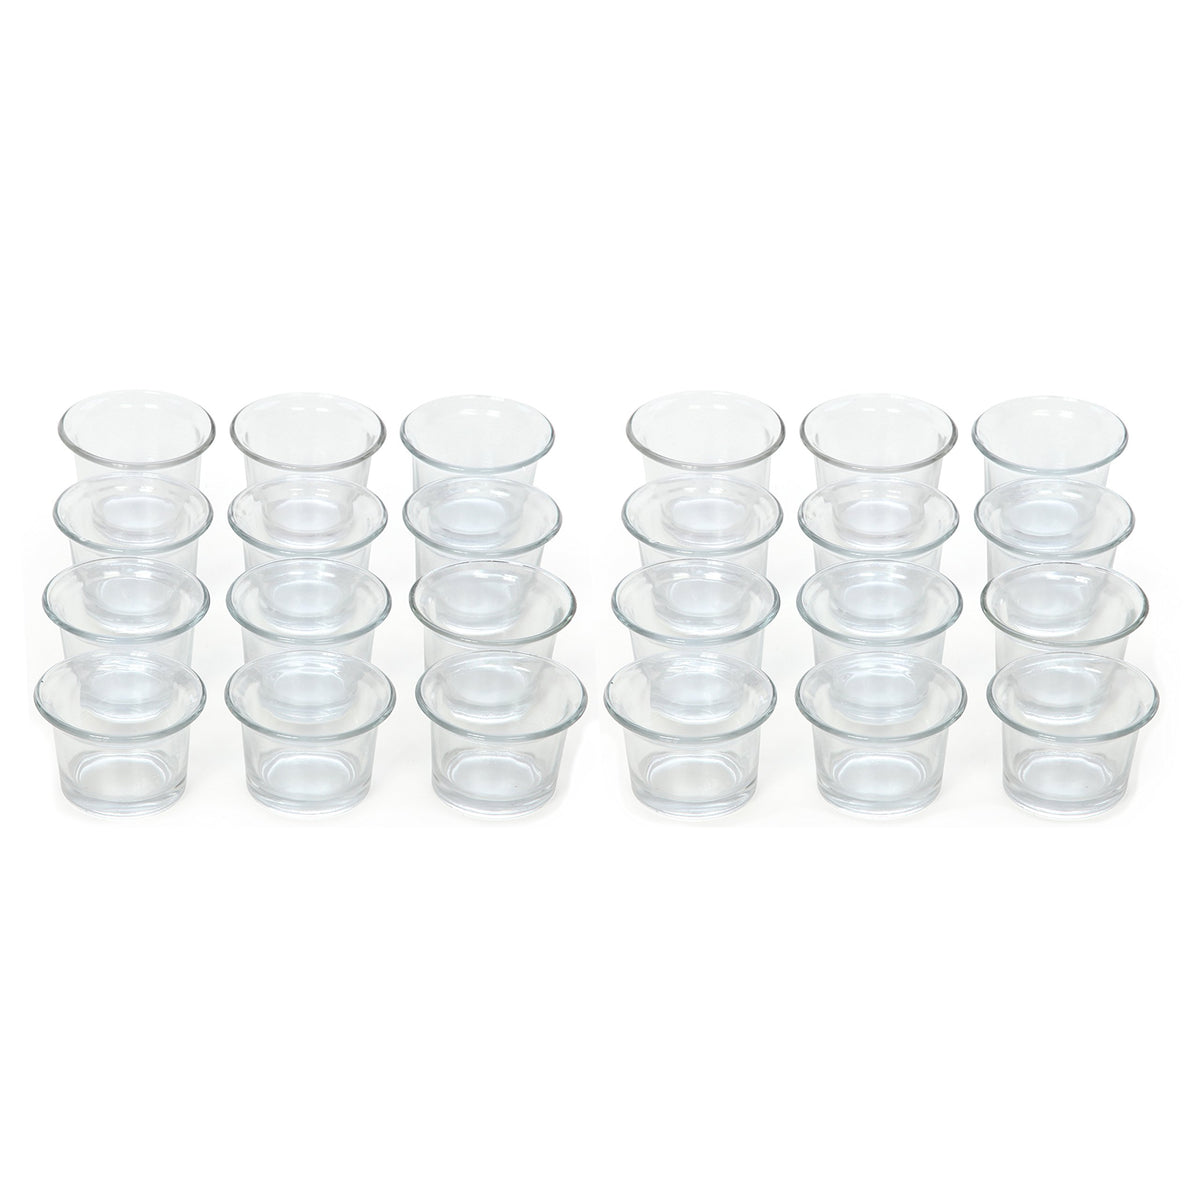 HOSLEY®  Clear Glass Tealight Holders, Oyster Cup Style , Set of 24, 2.5 inches Diameter each